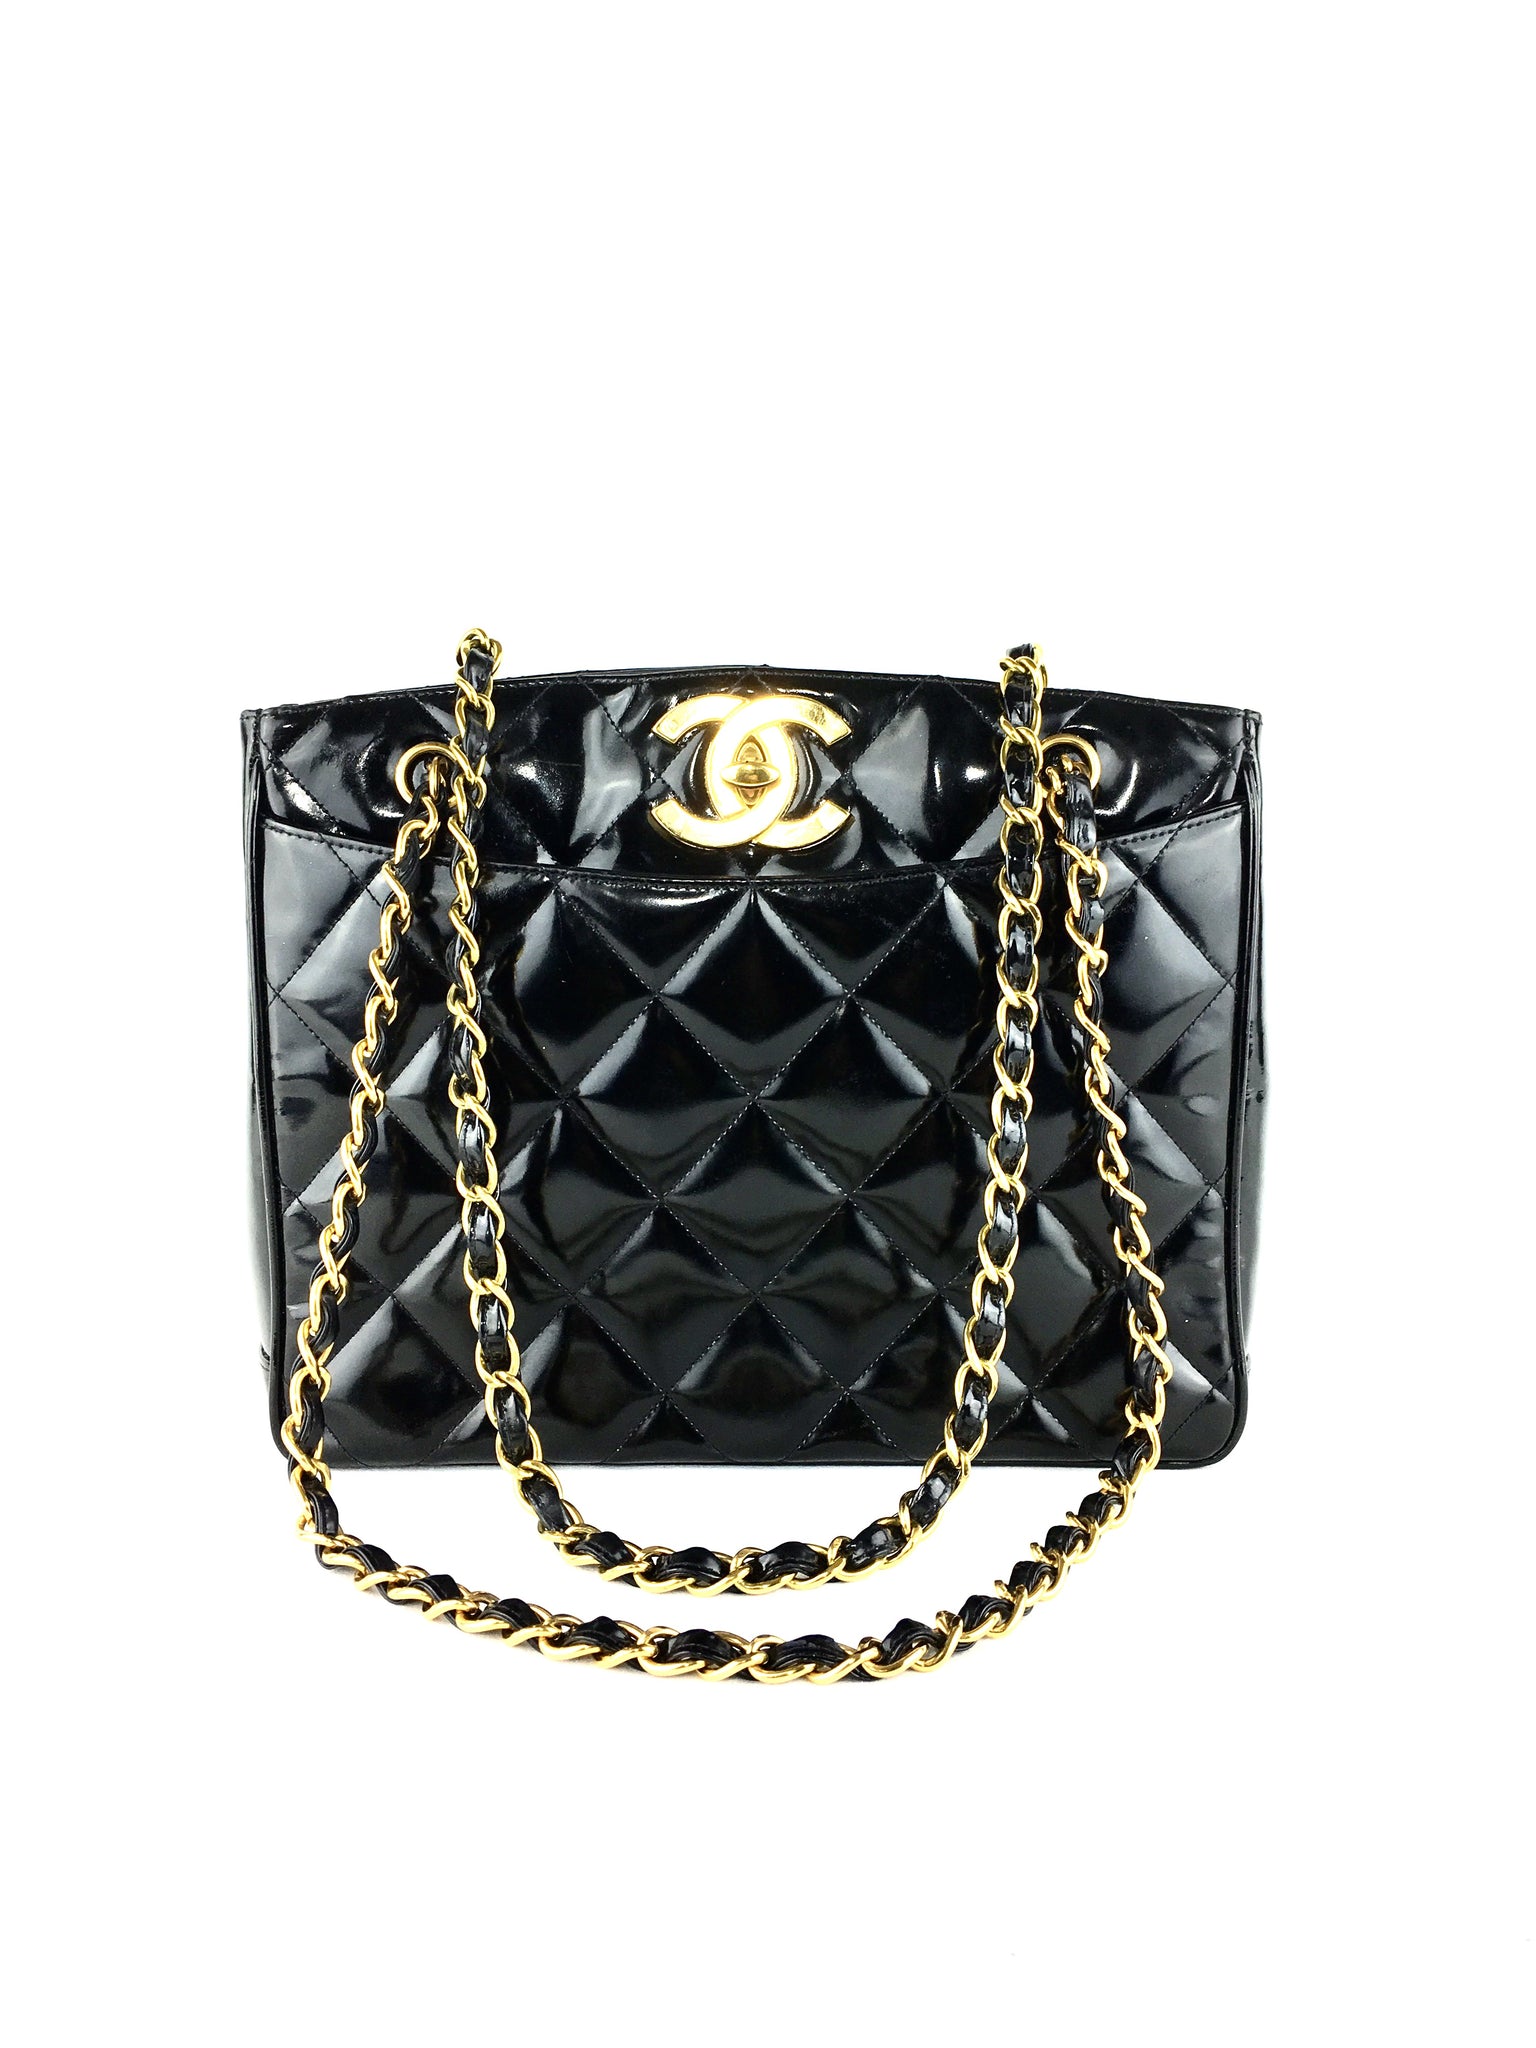 CHANEL Black Patent Leather Quilted Bag